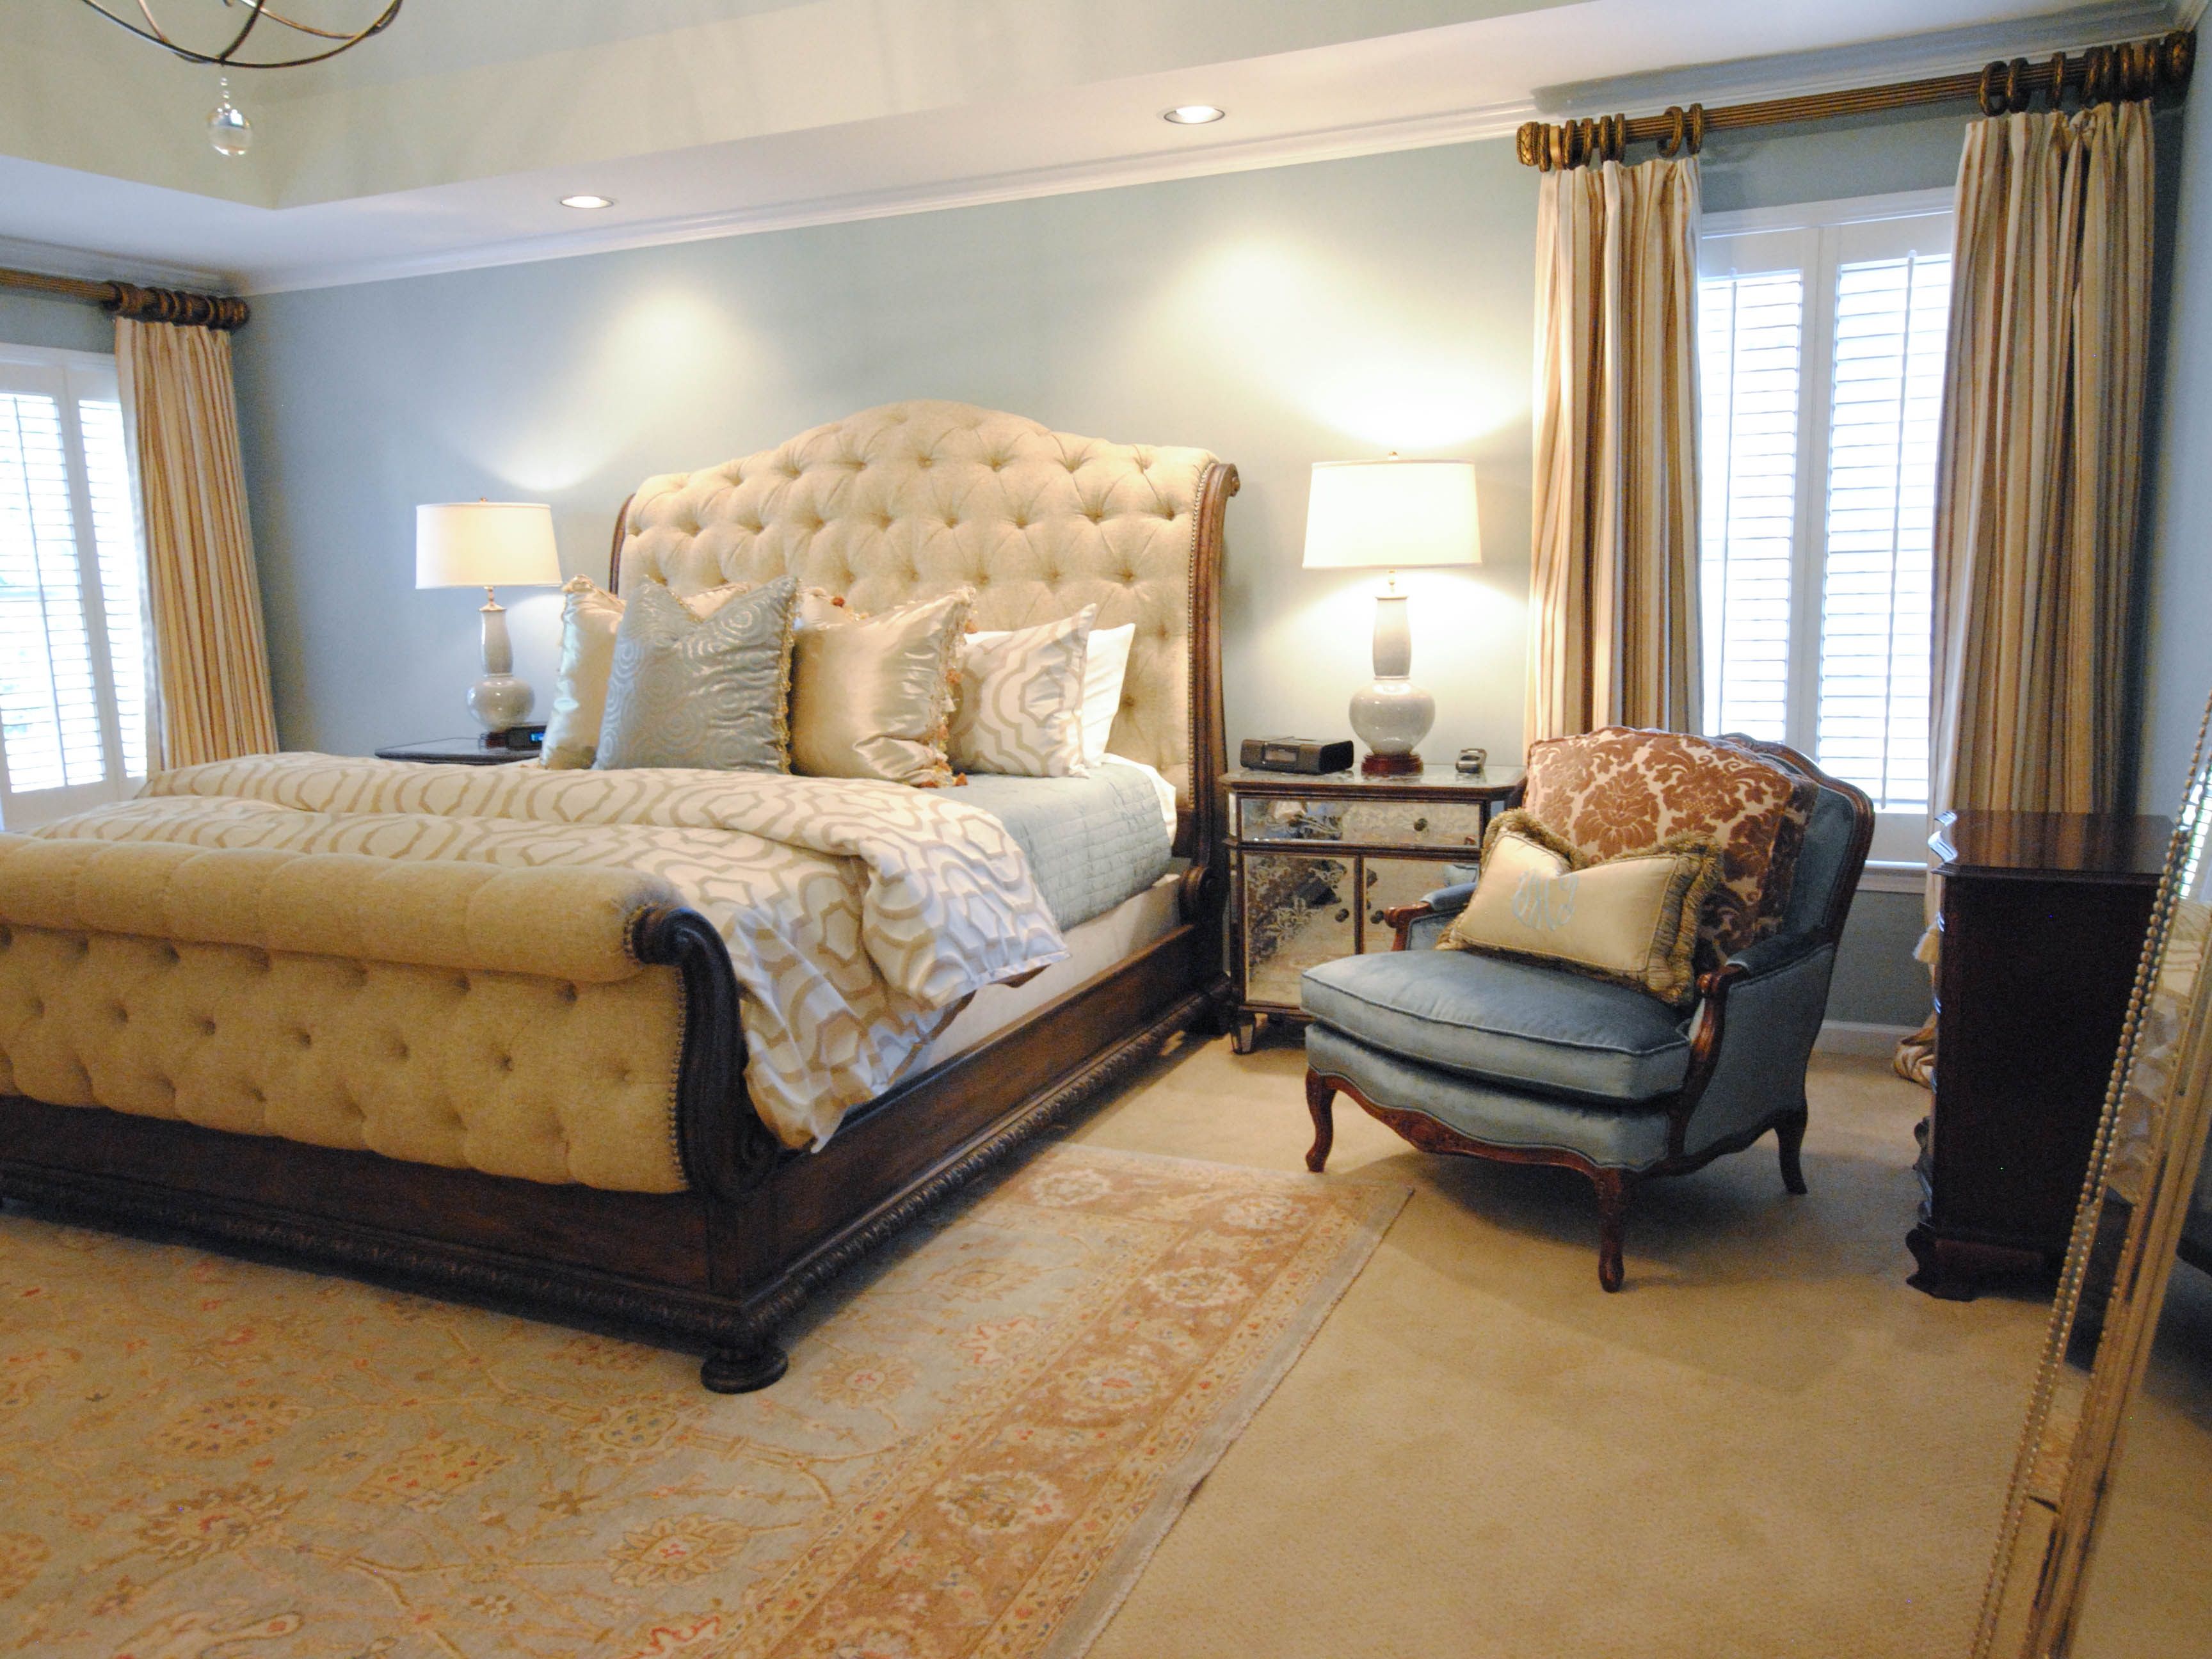 Classic Furniture For Elegant Bedroom (View 9 of 42)